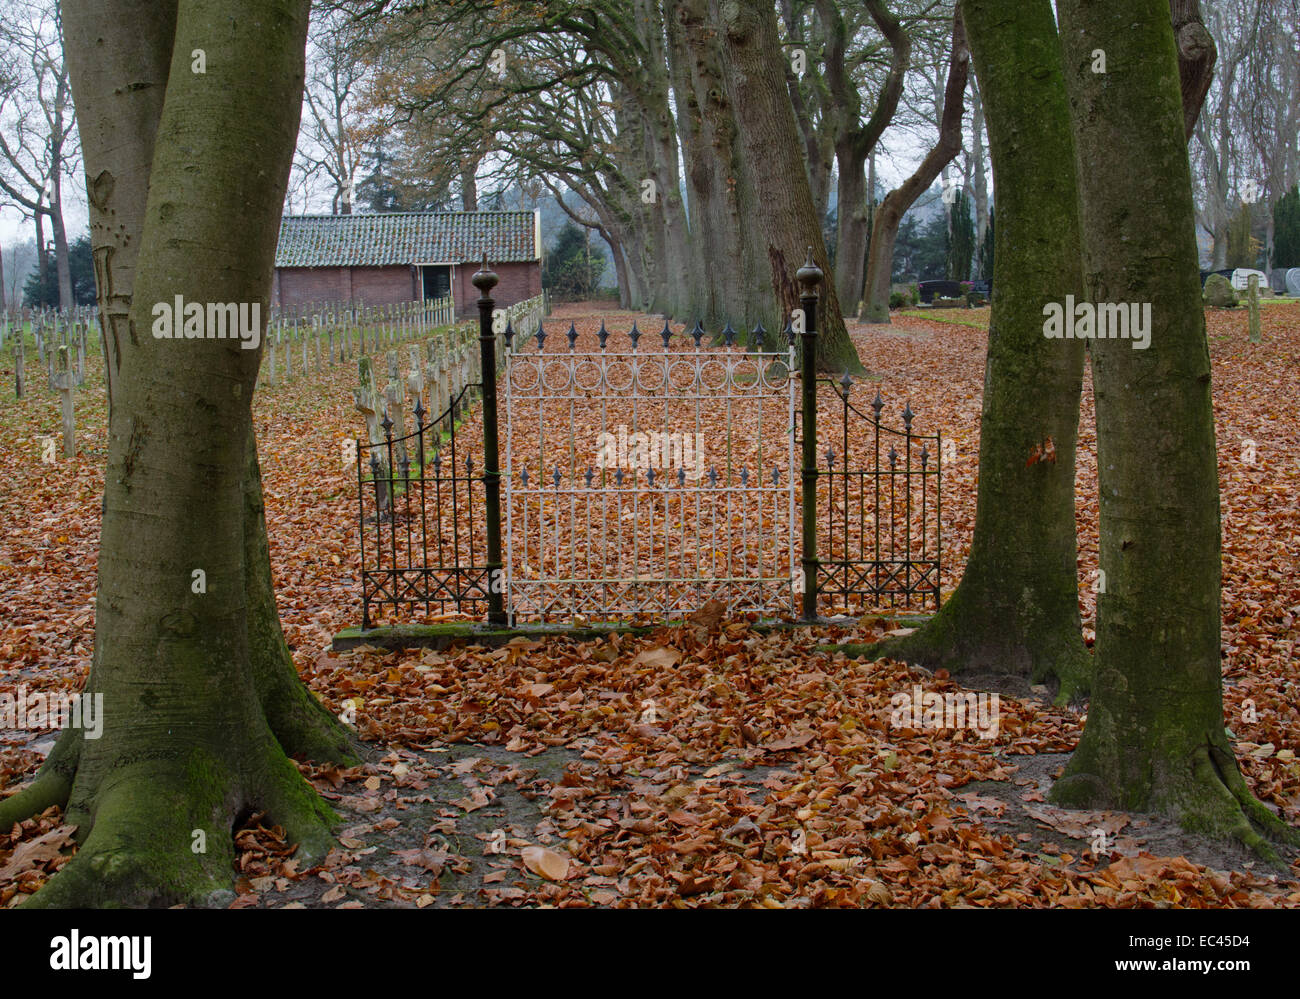 Forged iron gate of a cemetery between Beeches in autumn Stock Photo